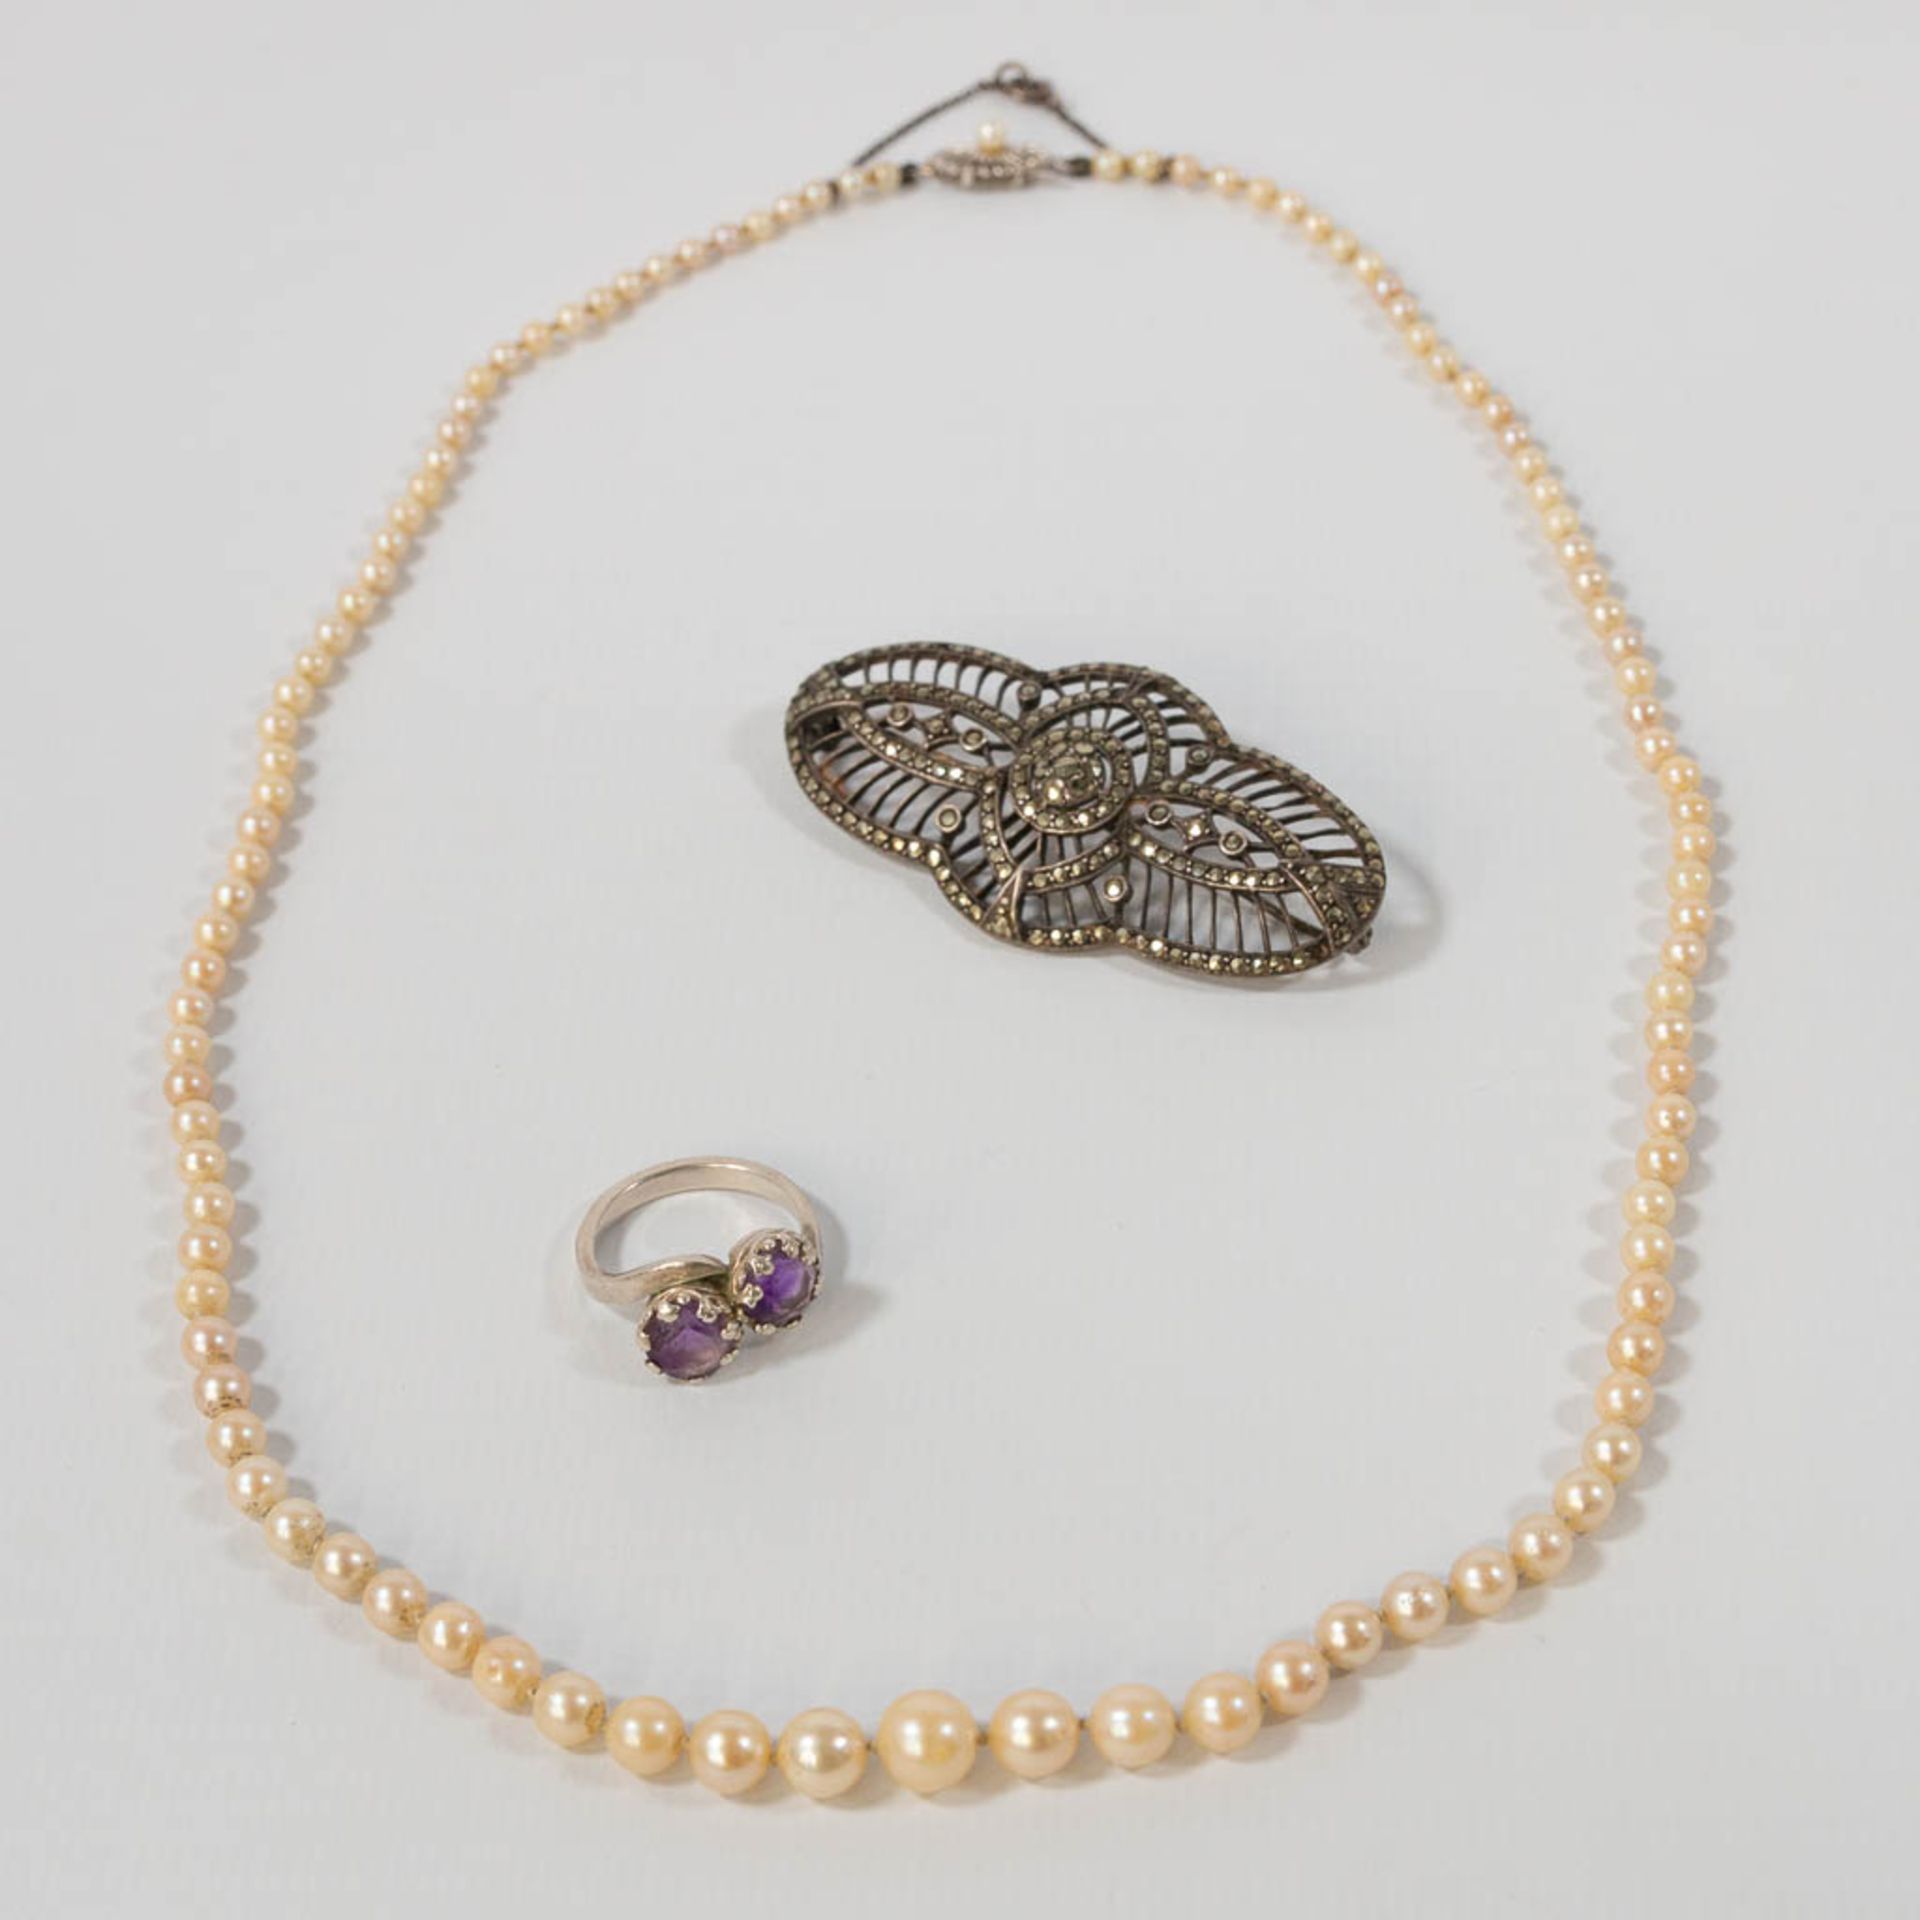 A pearl necklace with 18 karat white gold buckle, combined with a silver ring with purple stones and - Bild 3 aus 15